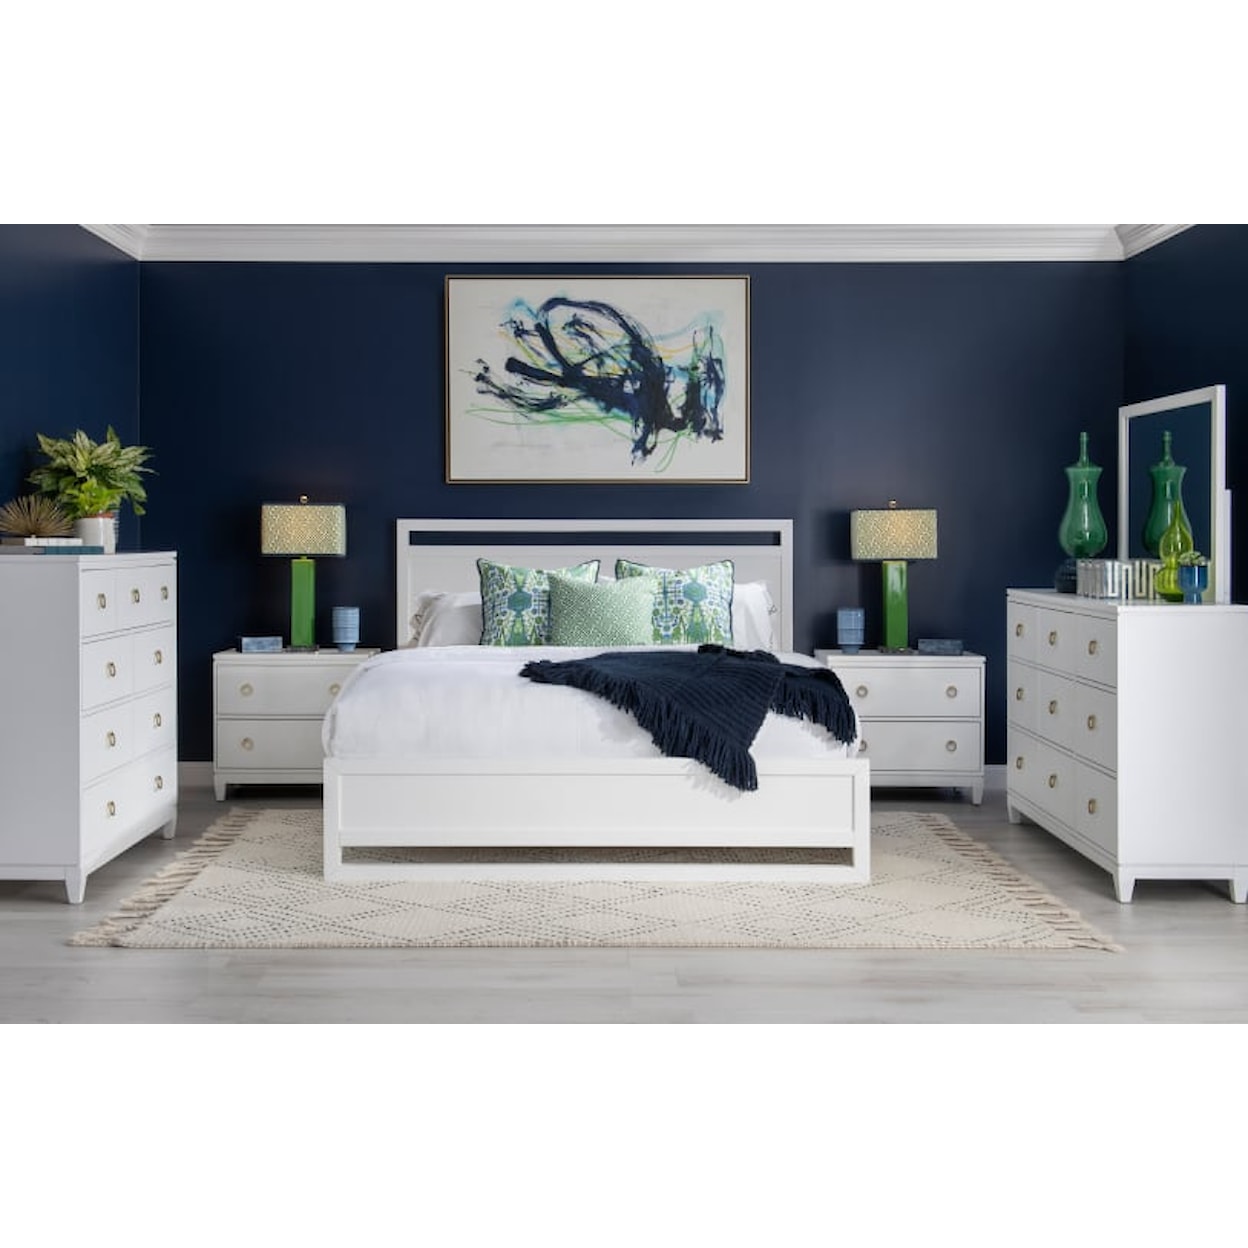 Legacy Classic Summerland Summerland Complete Panel Bed Ca King 60